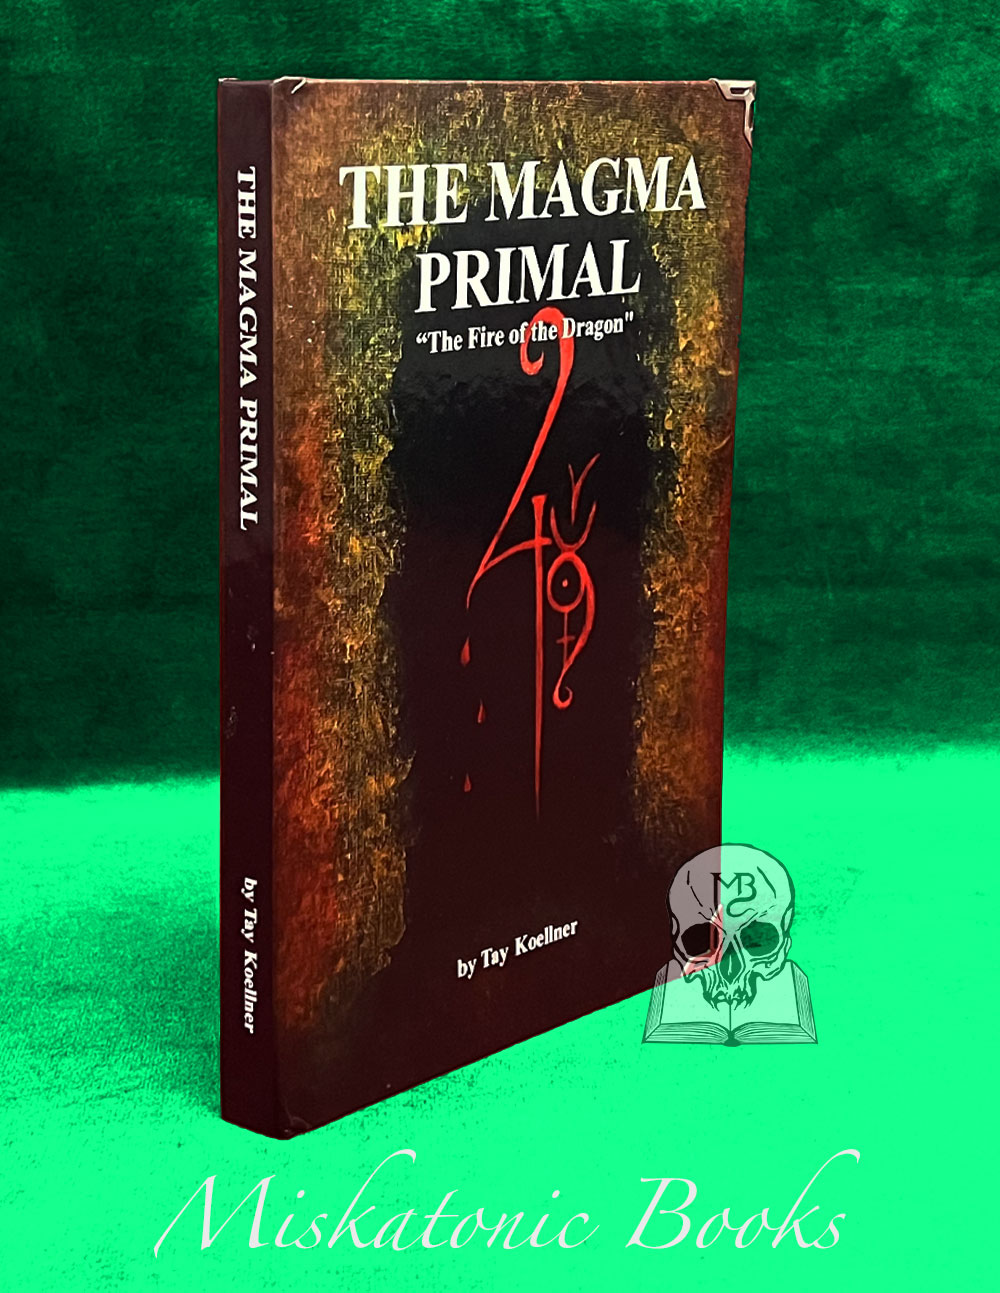 THE MAGMA PRIMAL: The Fire of the Dragon by Tay Koellner - Limited Edition Hardcover with Altar Cloth